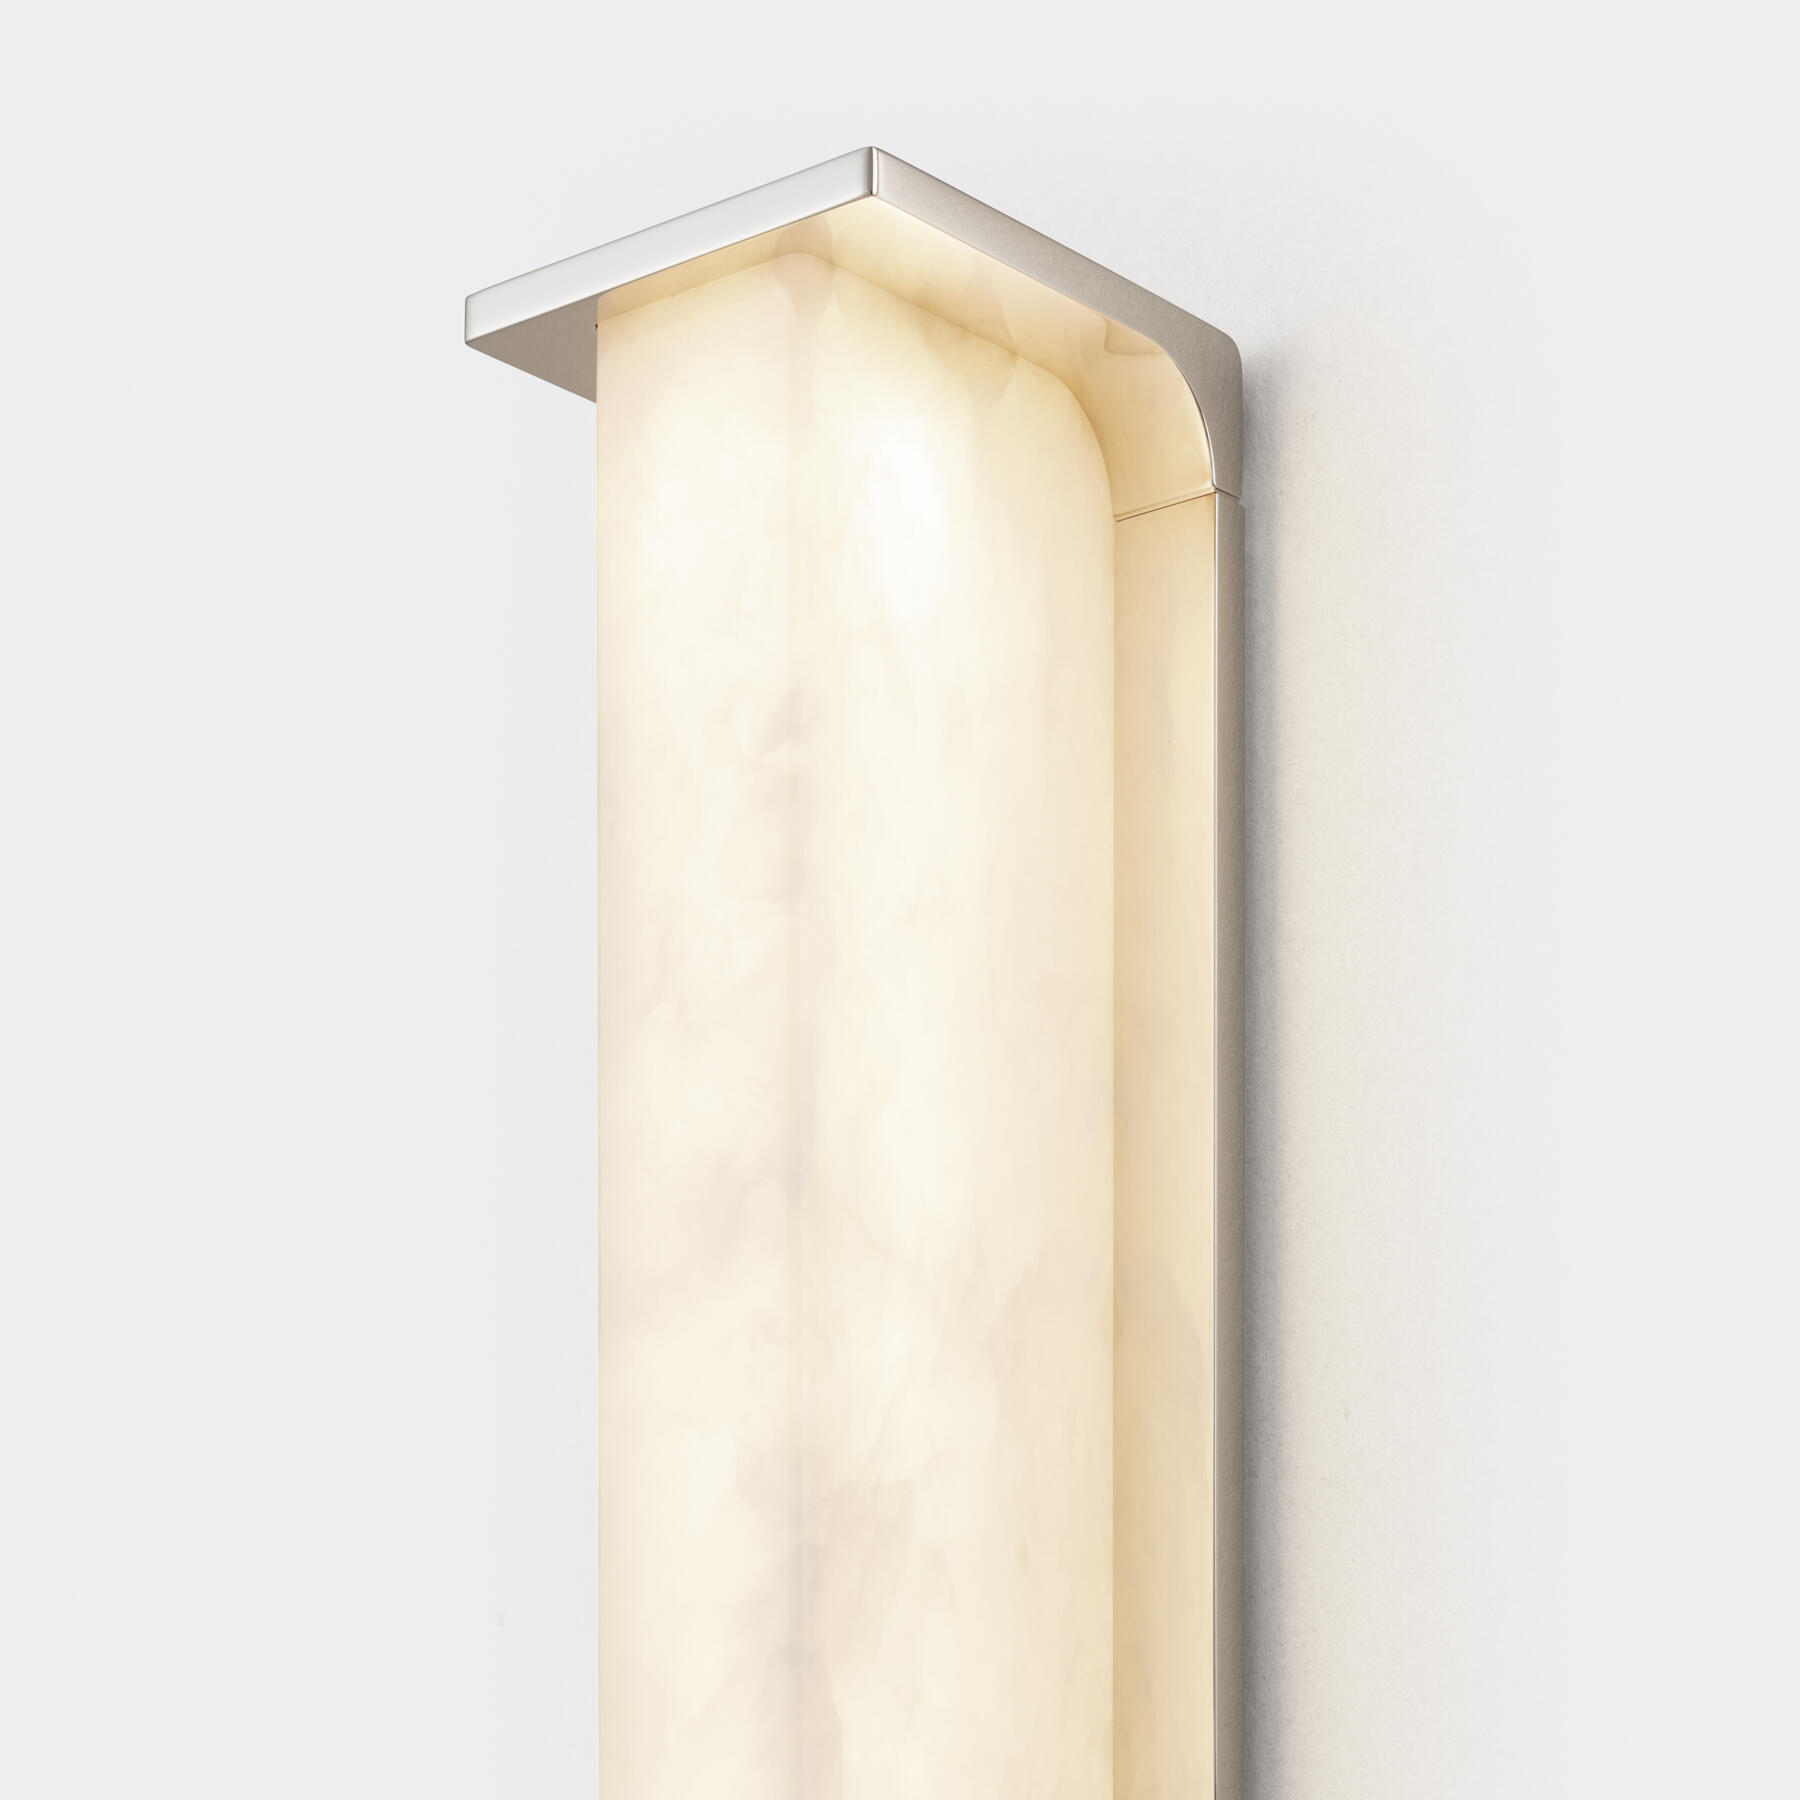 Bao Sconce, Lightly Aged Nickel with Alabaster